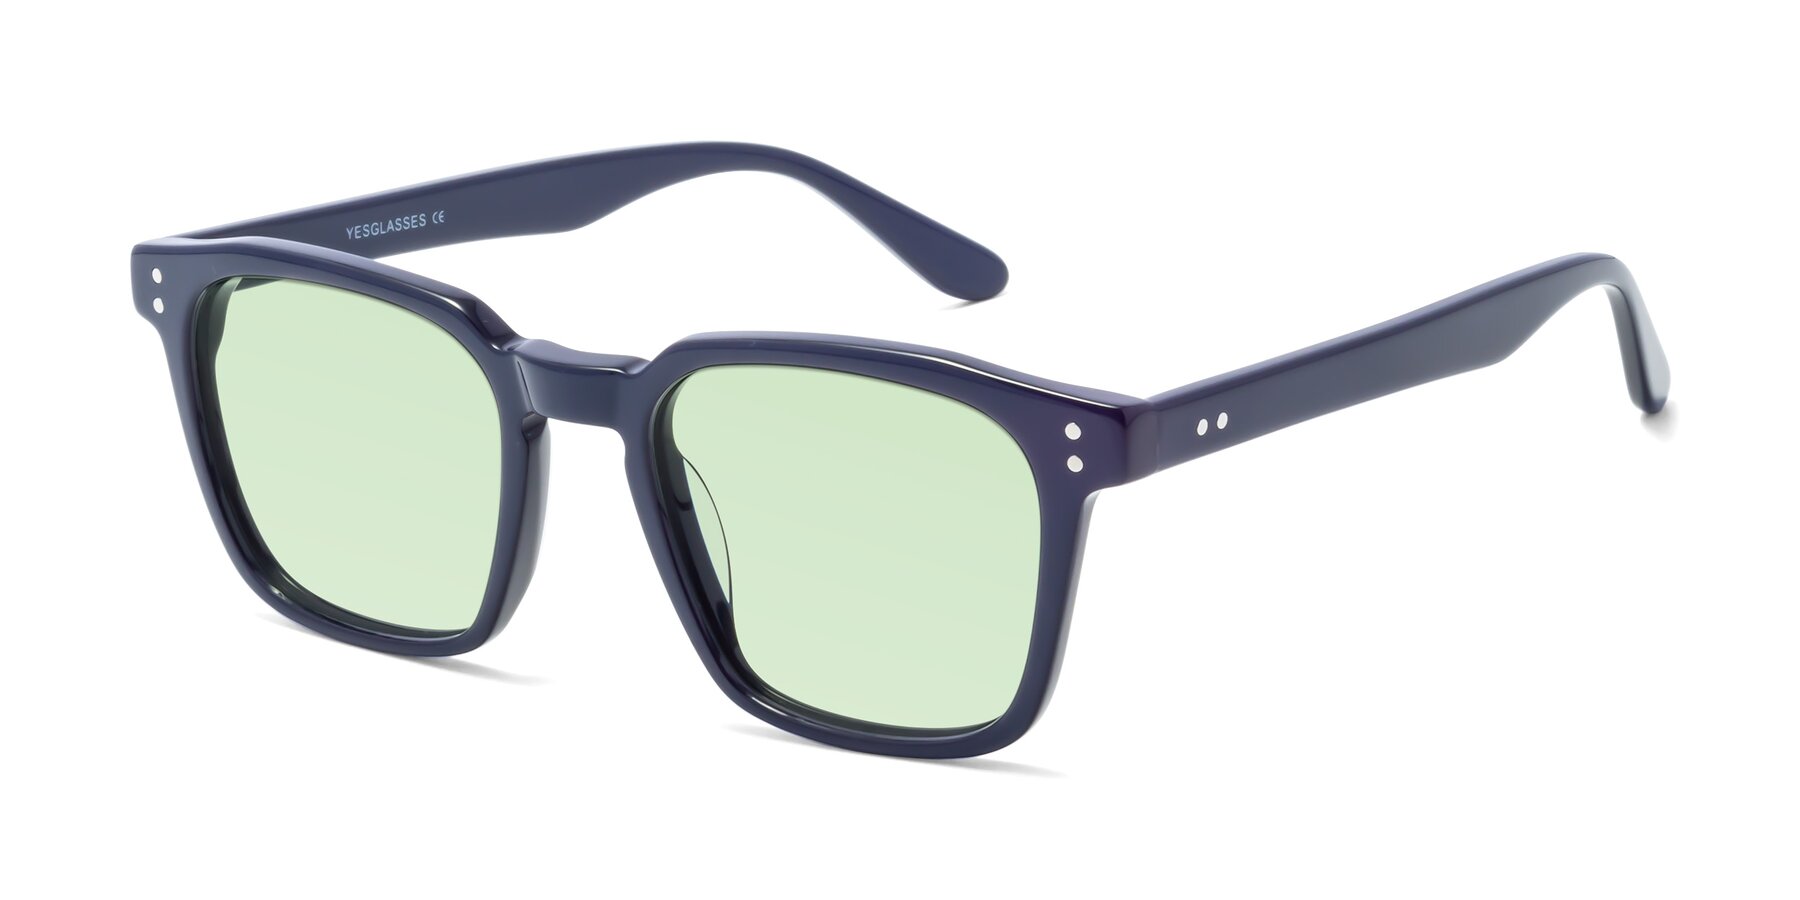 Angle of Riverside in Dark Blue with Light Green Tinted Lenses